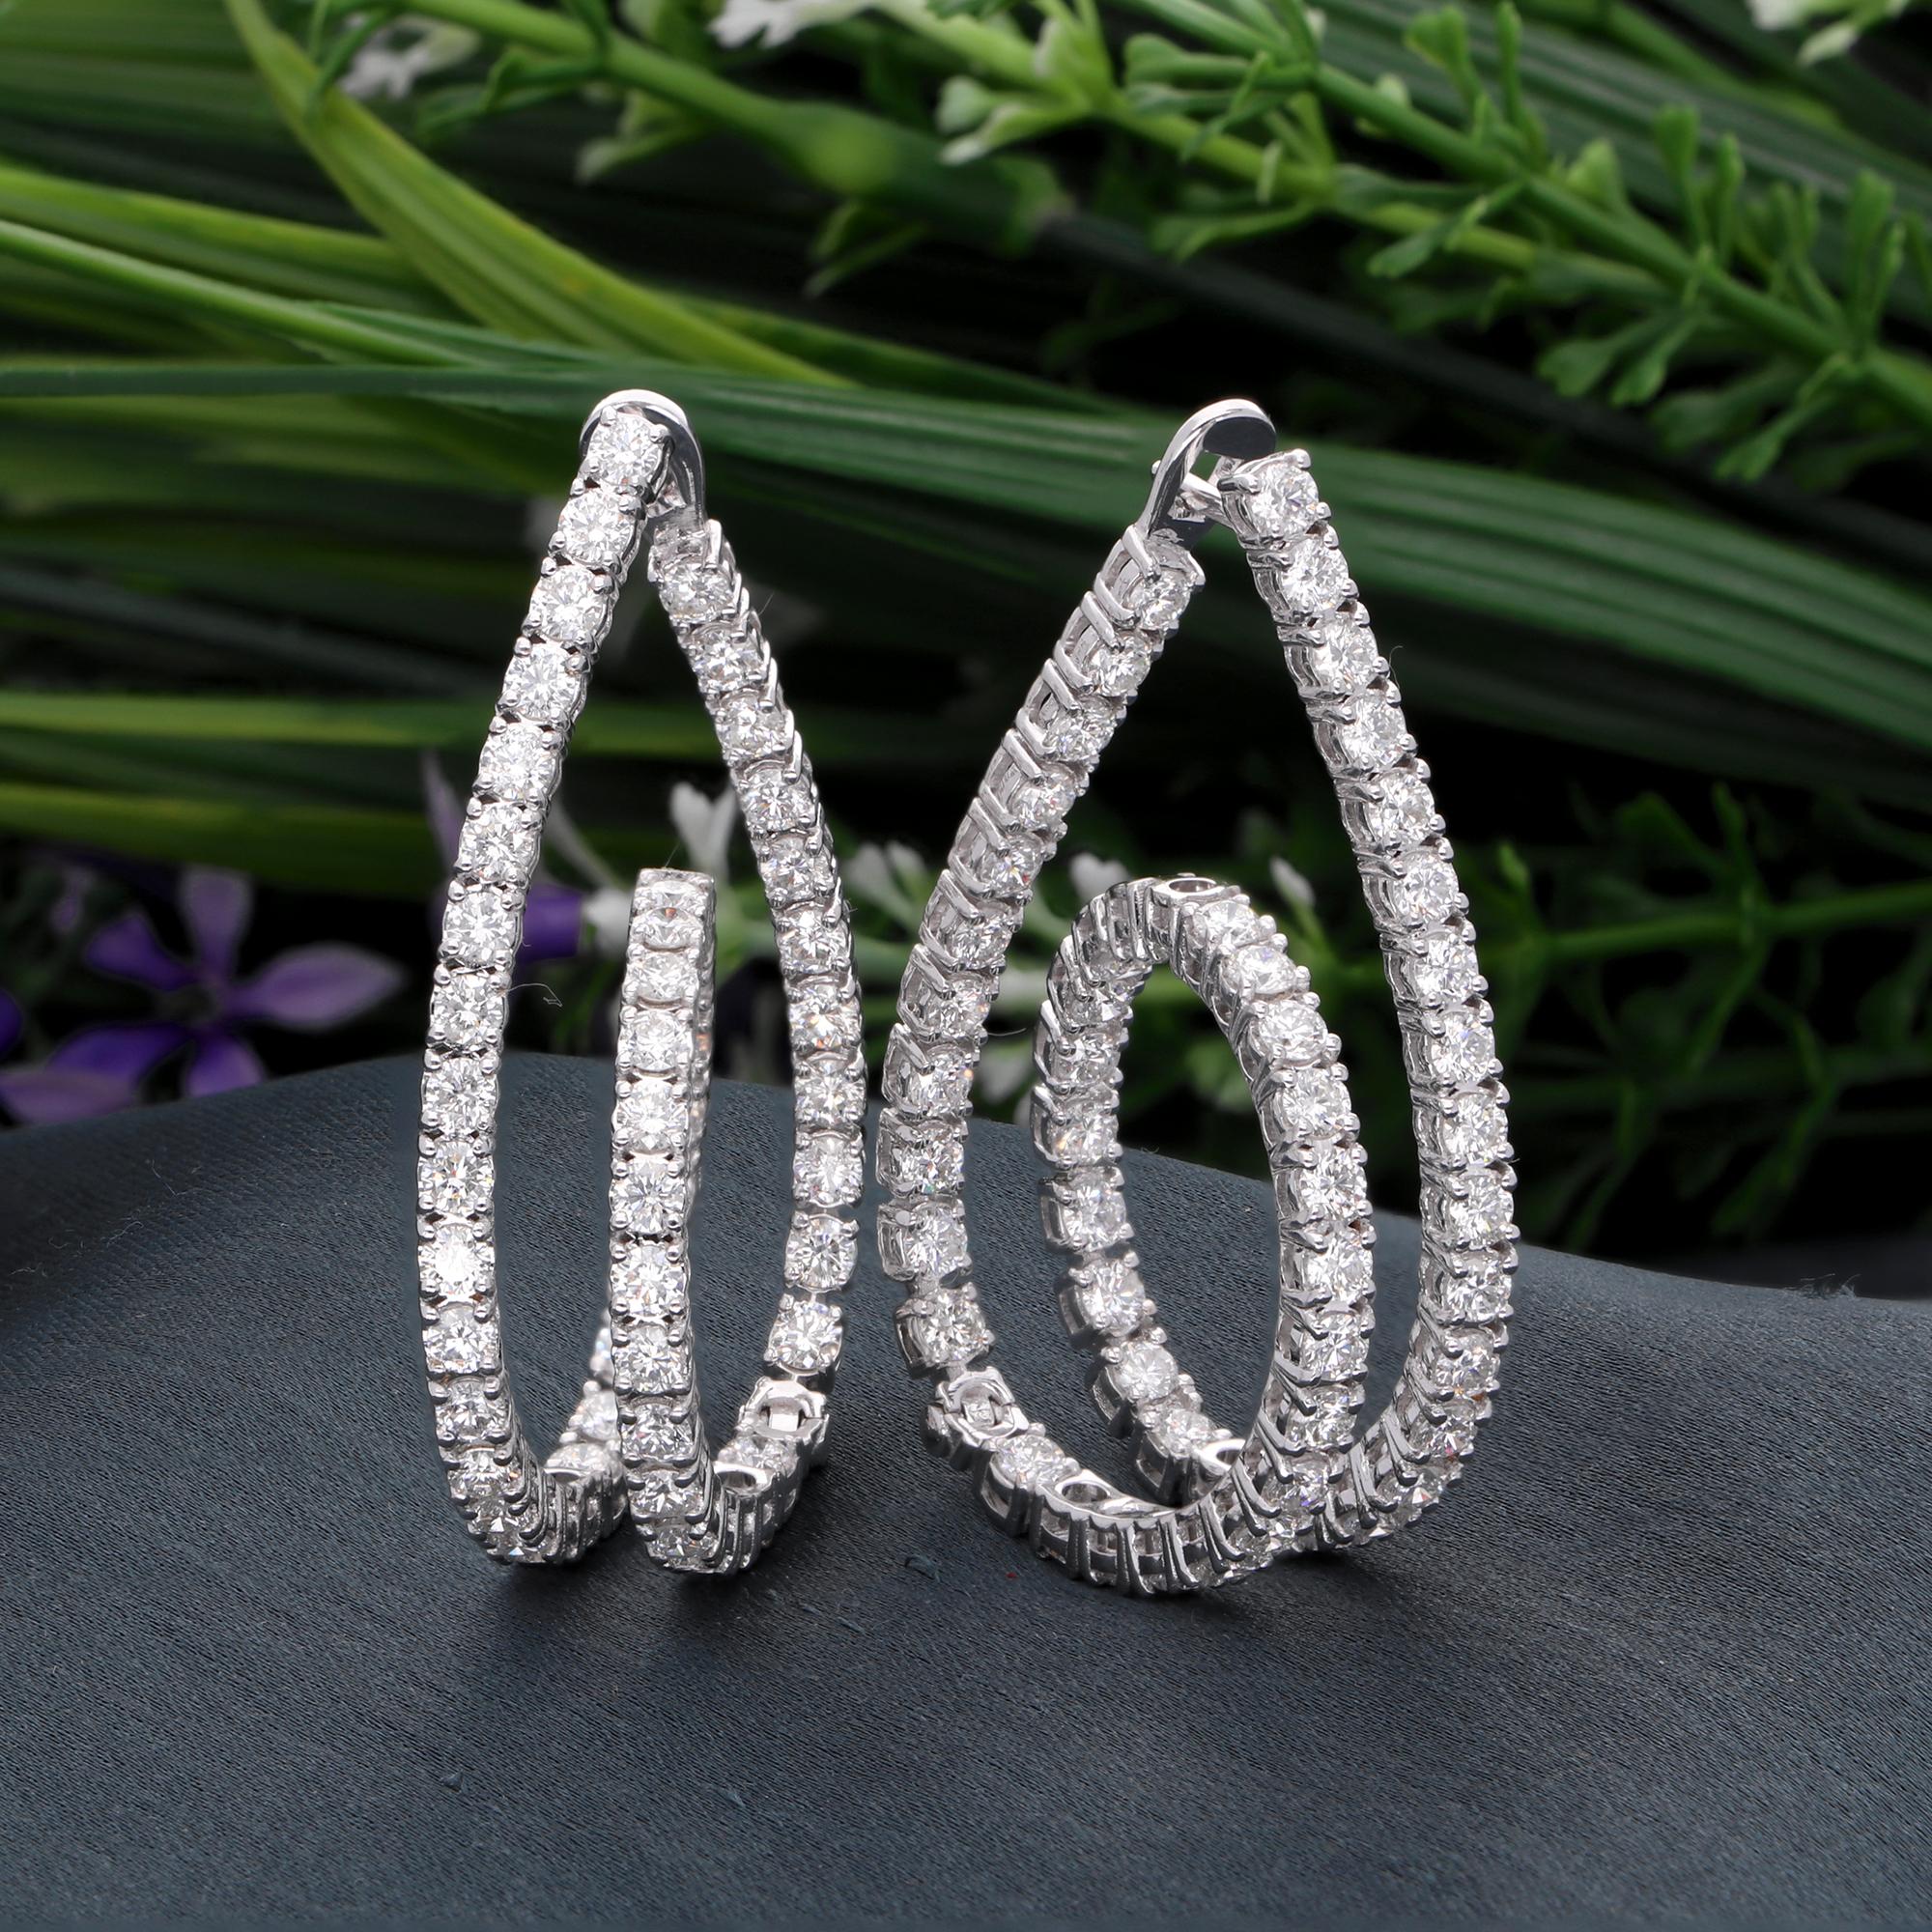 These Diamond Huggie Earrings with 6.22 ct. Genuine Diamonds are a promise of perfection and purity. These hoops are set in 14k Solid White Gold. You can choose these earrings in 10k/14k/18k, Rose Gold/White Gold/Yellow Gold.

These are perfect Gift